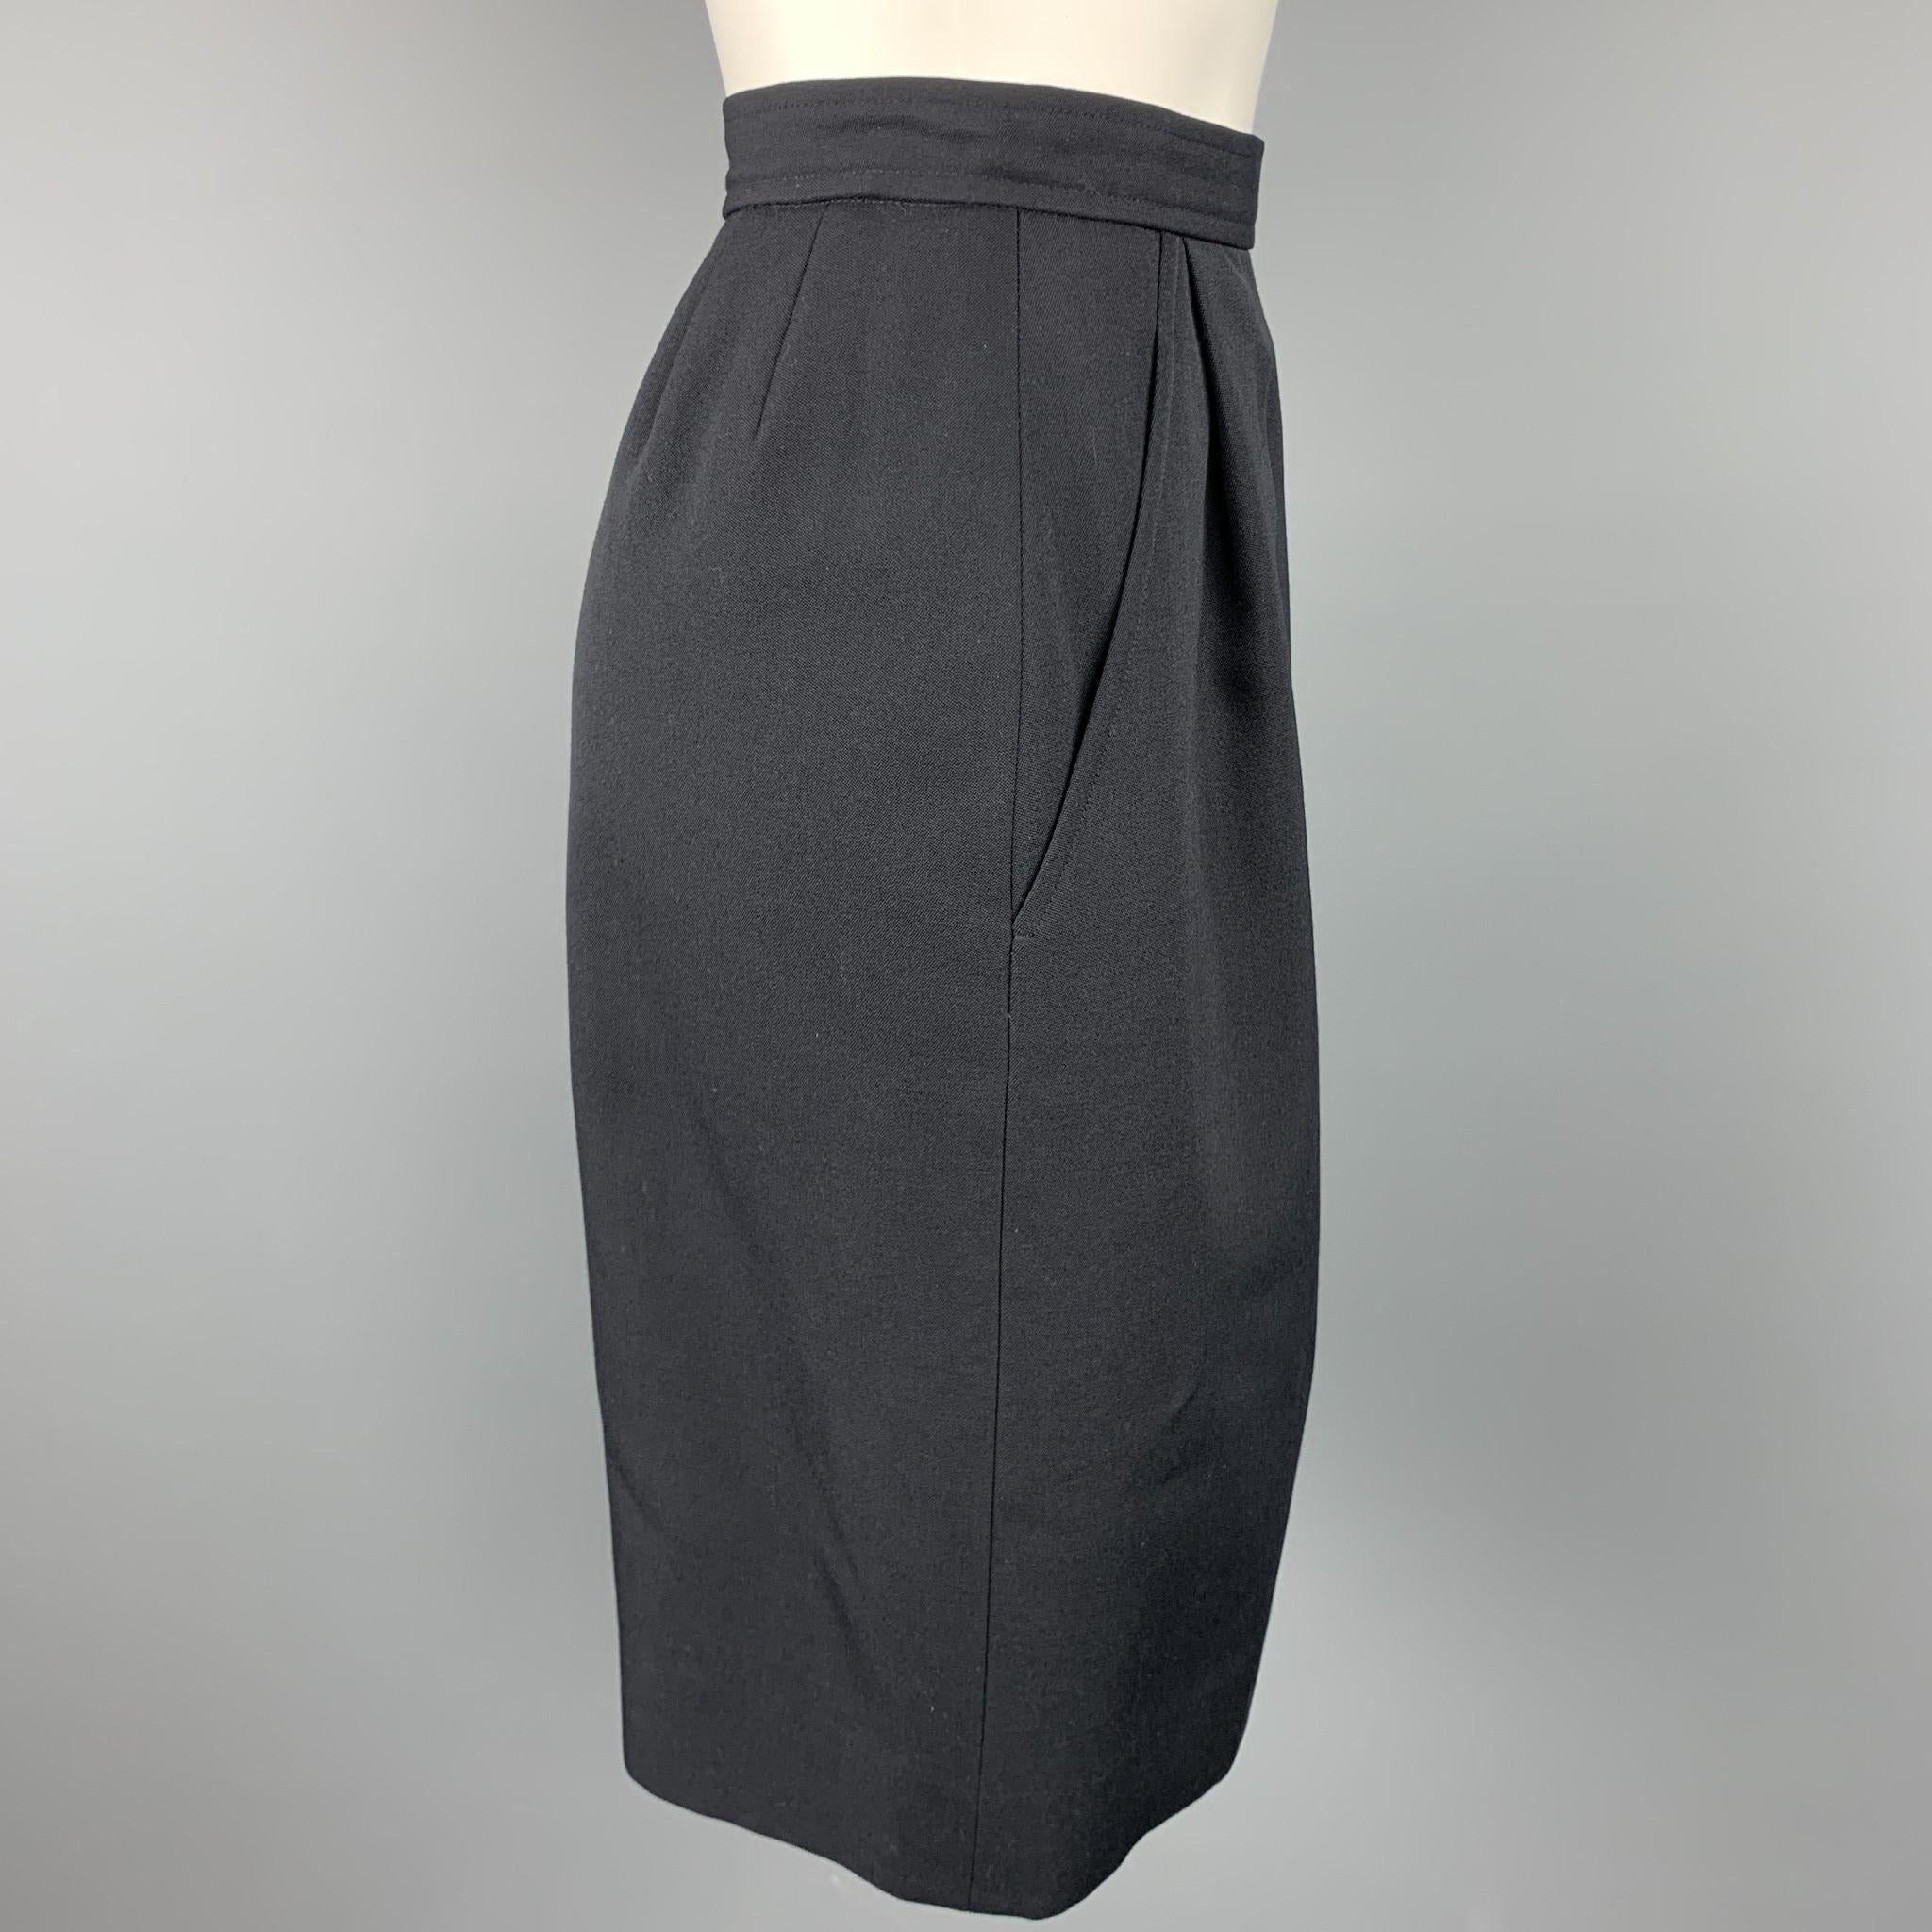 Vintage YVES SAINT LAURENT Rive Gauche skirt comes in a navy wool with a full liner featuring a pencil style, slit pockets, and a side button & zip up closure. Made in France.

Very Good Pre-Owned Condition.
Marked: 38

Measurements:

Waist: 27 in.